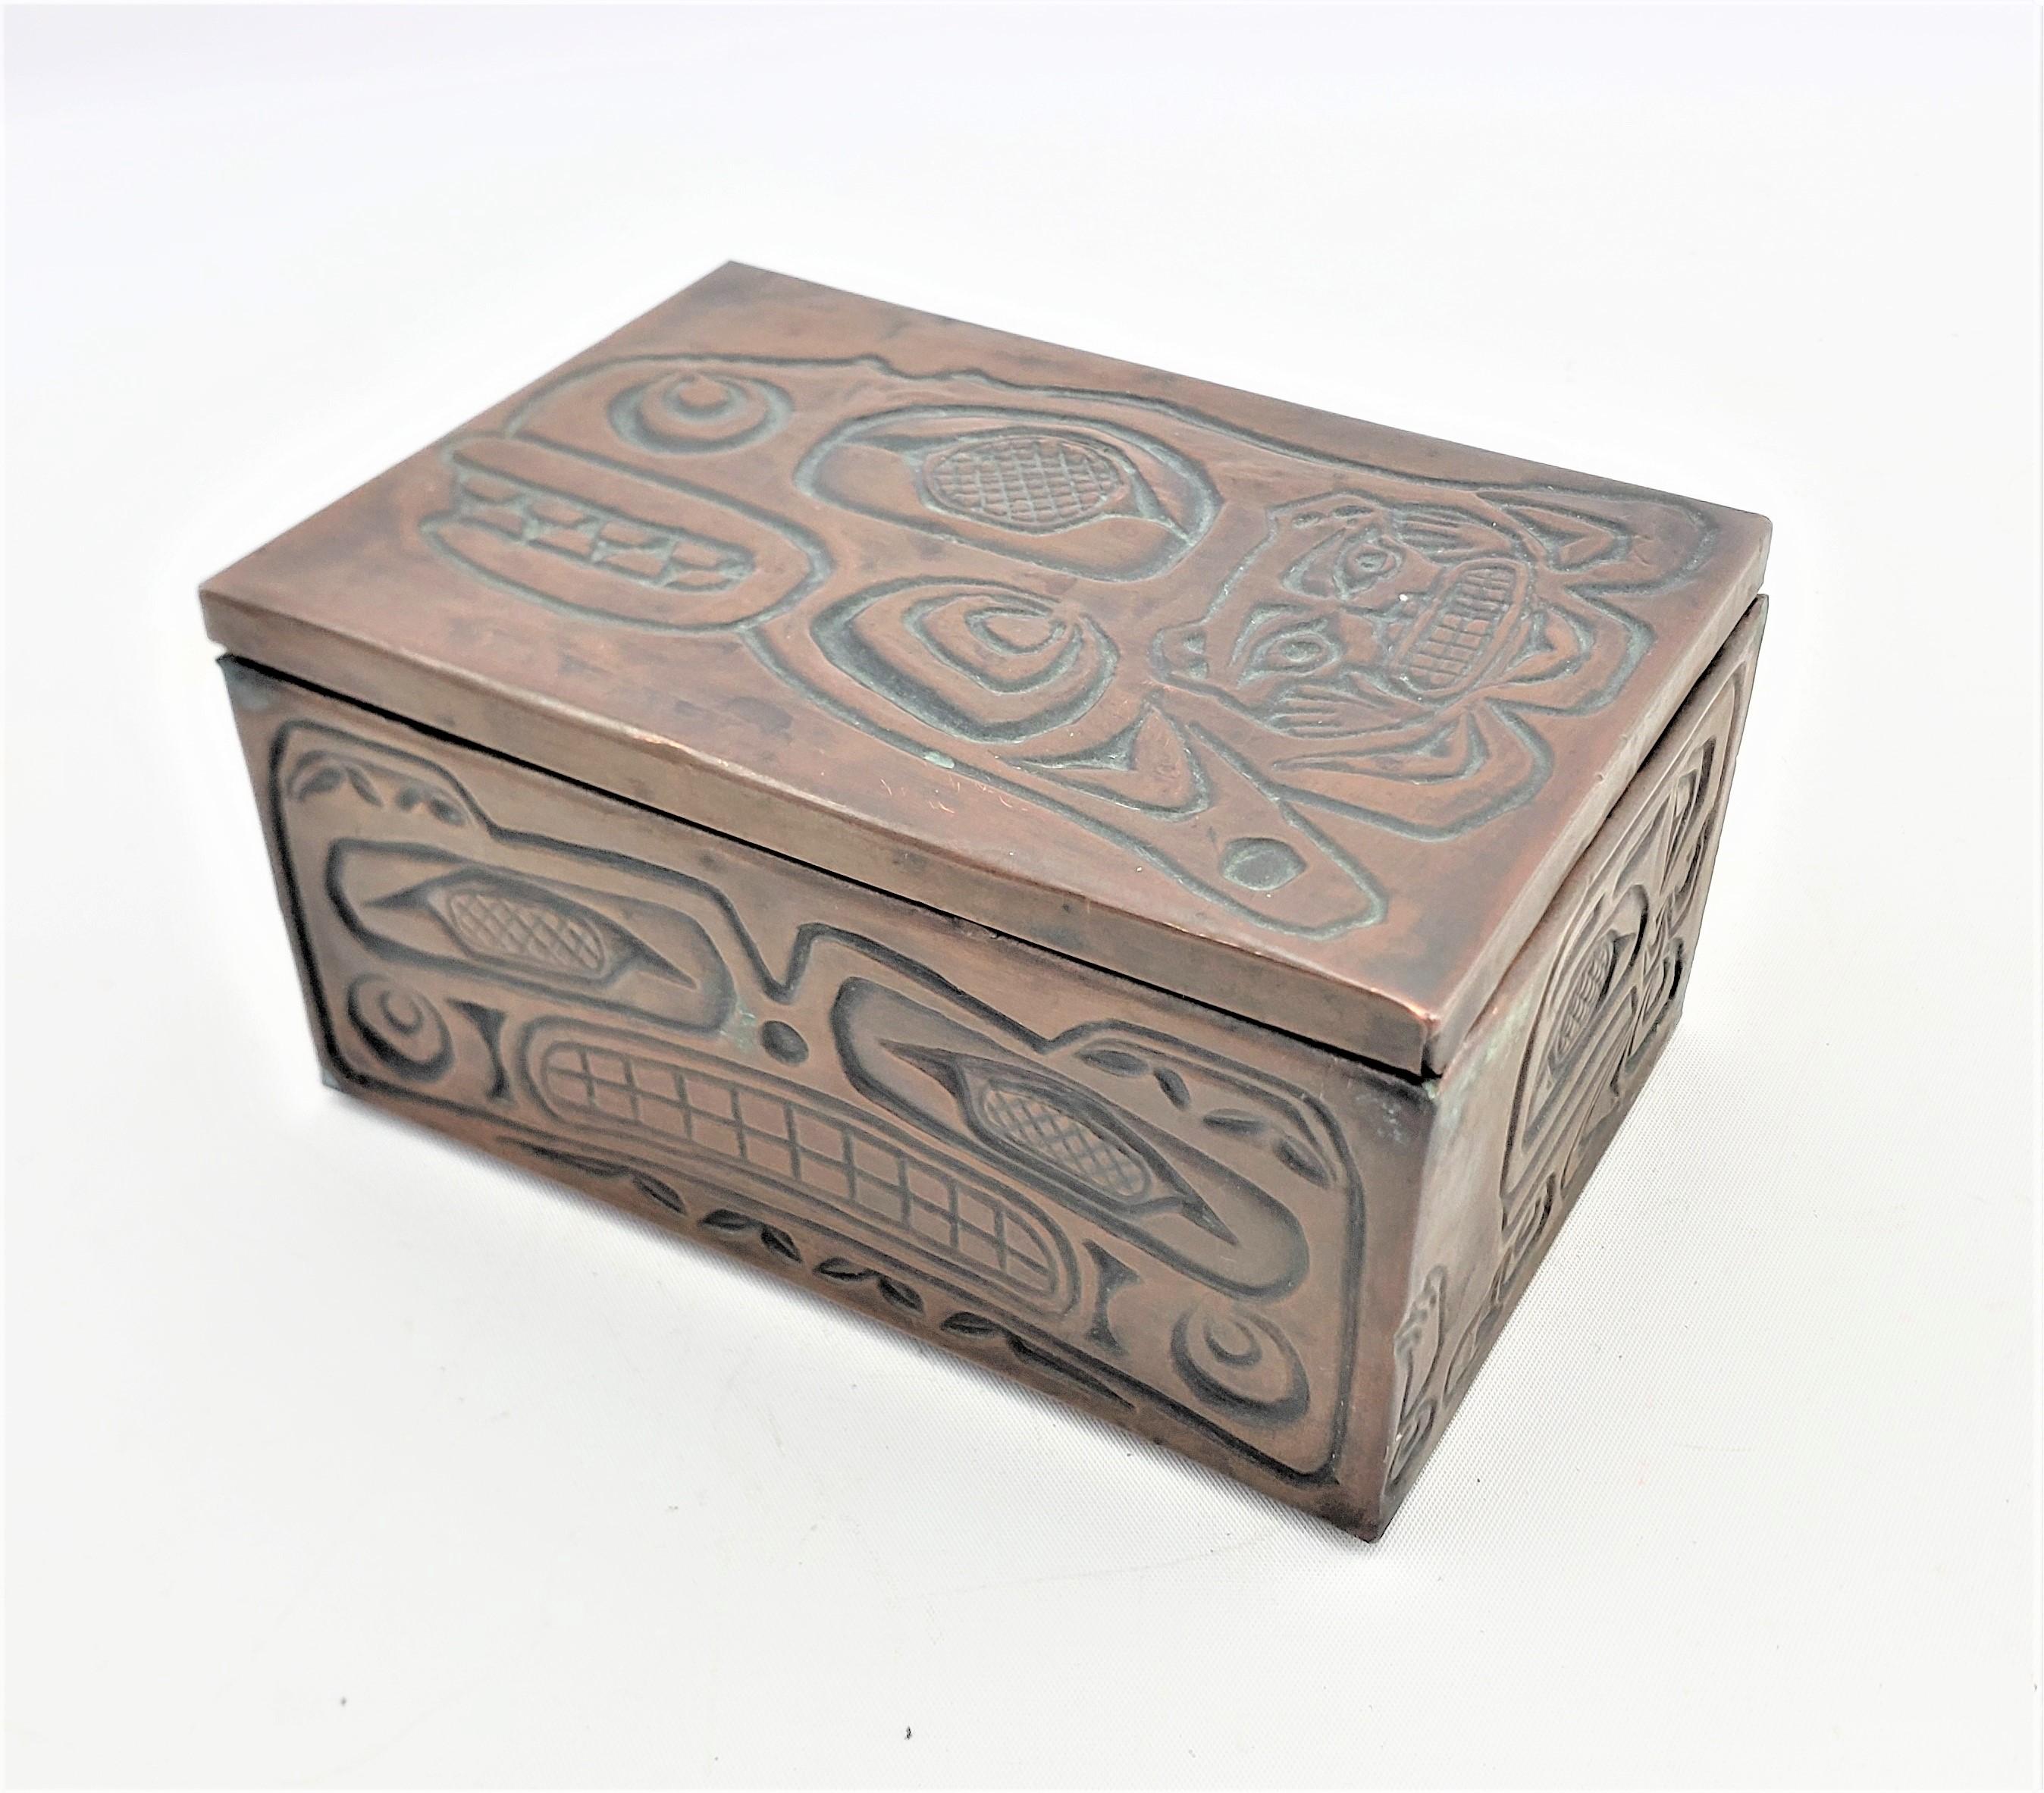 This small hand-crafted decorative or jewelry box is unsigned, but presumed to have originated from Canada, dating to approximately 1960 and done in the West Coast Haida style. The box is composed of wood, likely cedar, which has been covered with